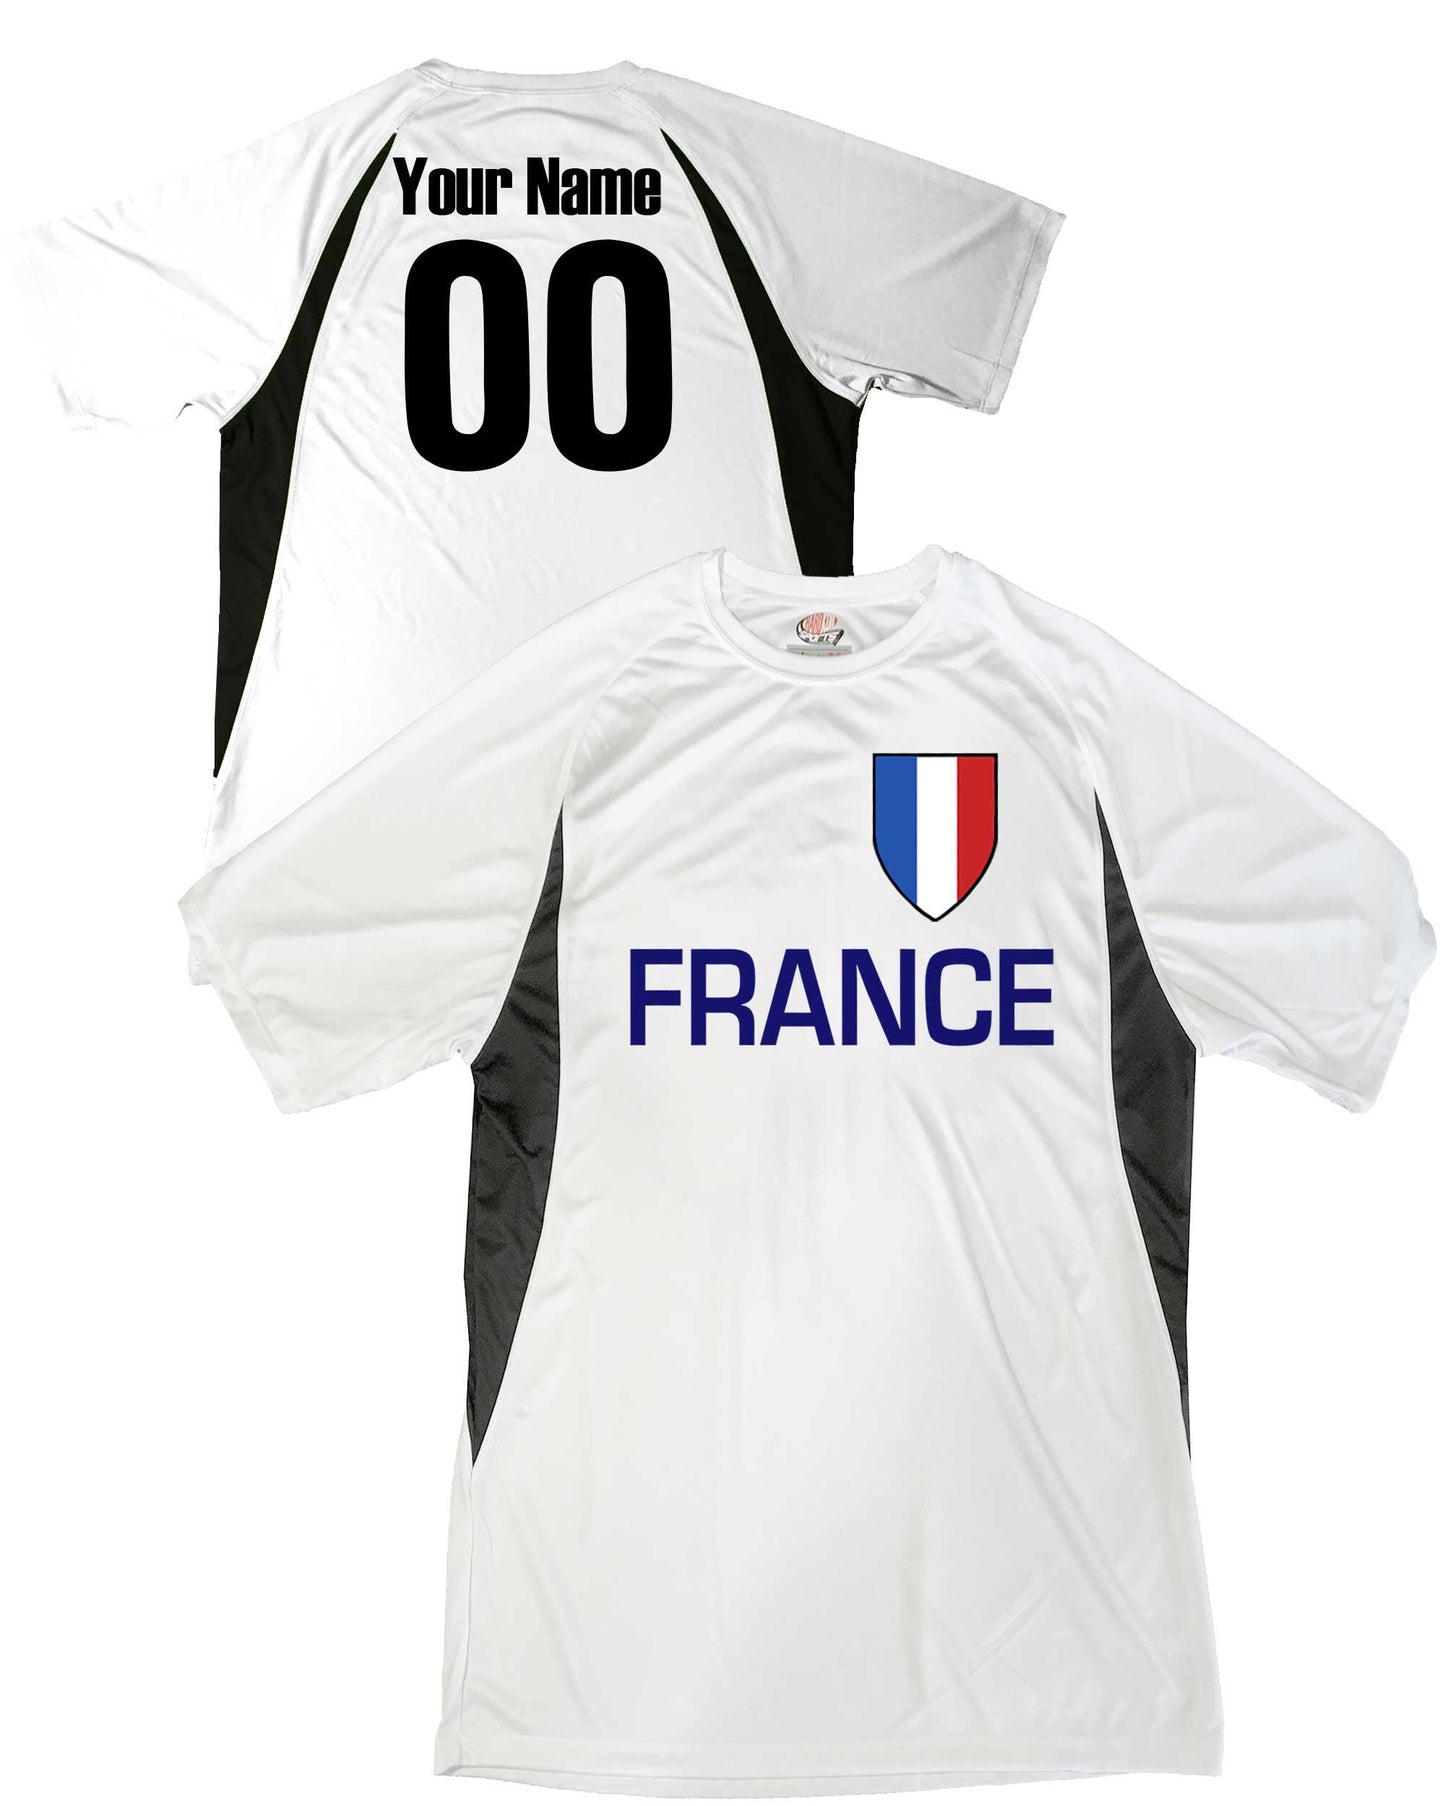 France Soccer Jersey, French Flag Soccer Shield Design, Customized with Your Names and Numbers in Your choice of Popular Colors